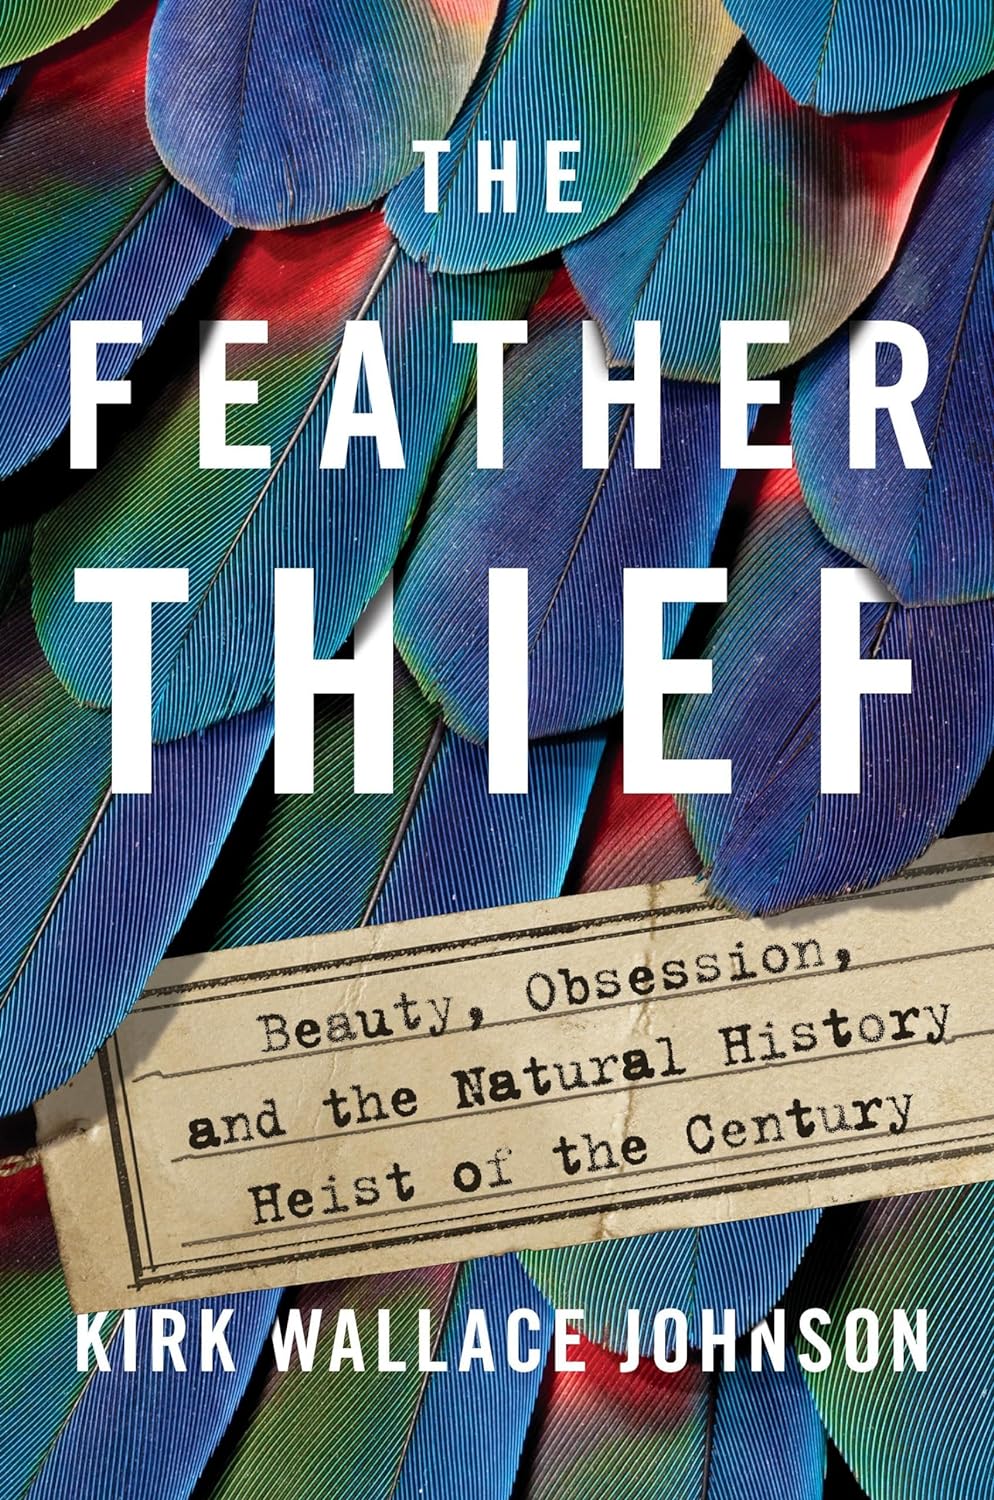 Front cover of the book The Feather Thief, which has large blue, green, and red feathers across the entire cover.